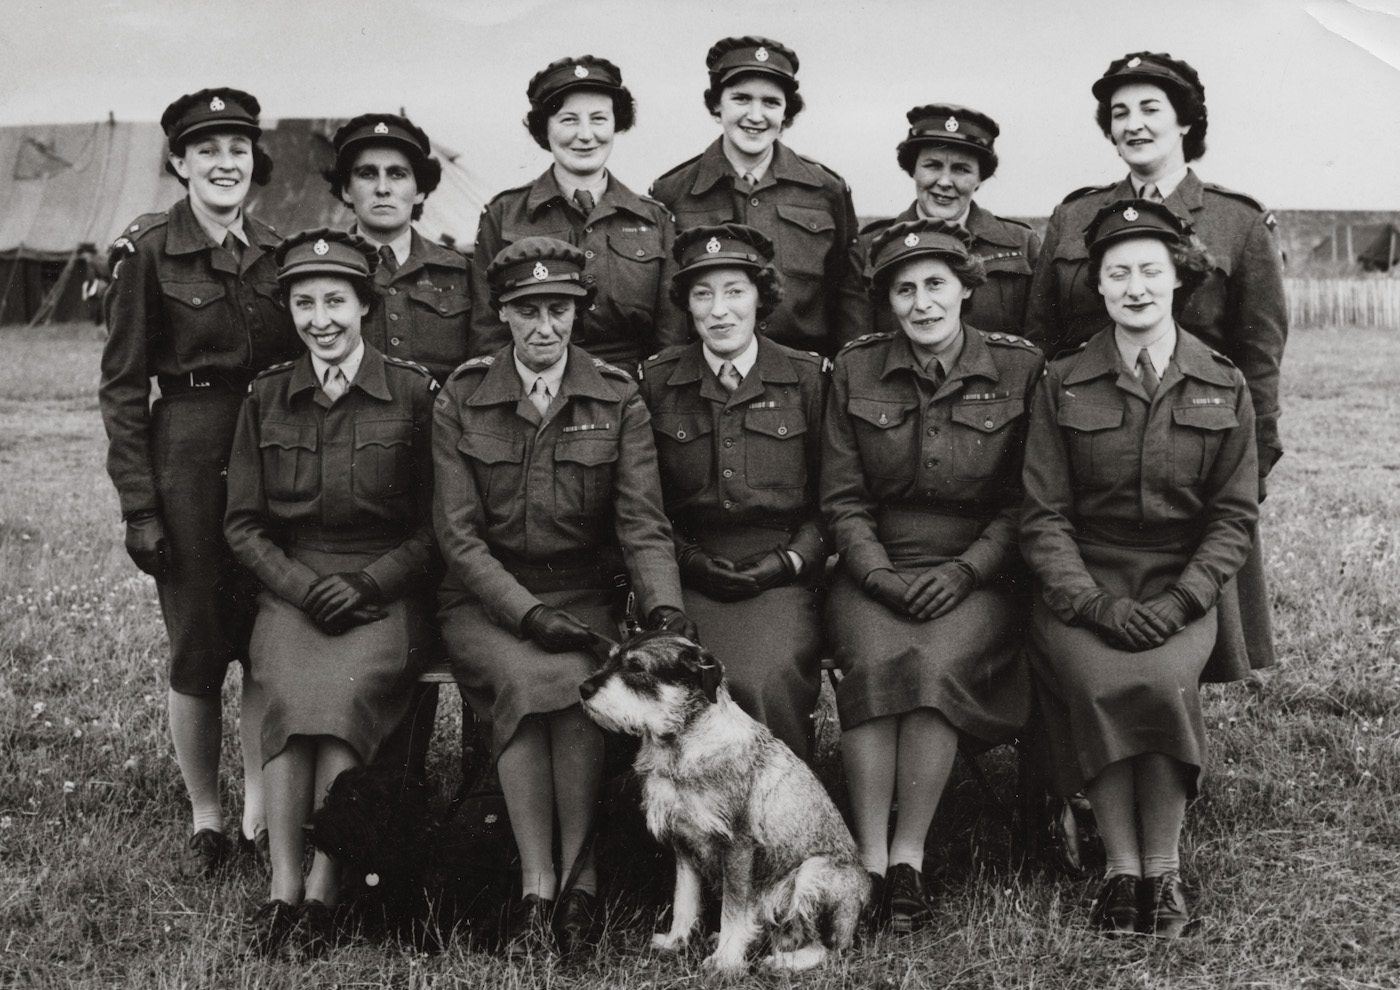 My mother (back left), 2nd Lieutenant, with other Women's Royal Army Corps officers in Scotland, c. 1949. The Schnauzer was the Commanding Officer's and was apparently a vicious beast that everyone was afraid of. Mom was drafted and served as a truck driver.

I have to check the details with my mother and her Service Book. View full size.